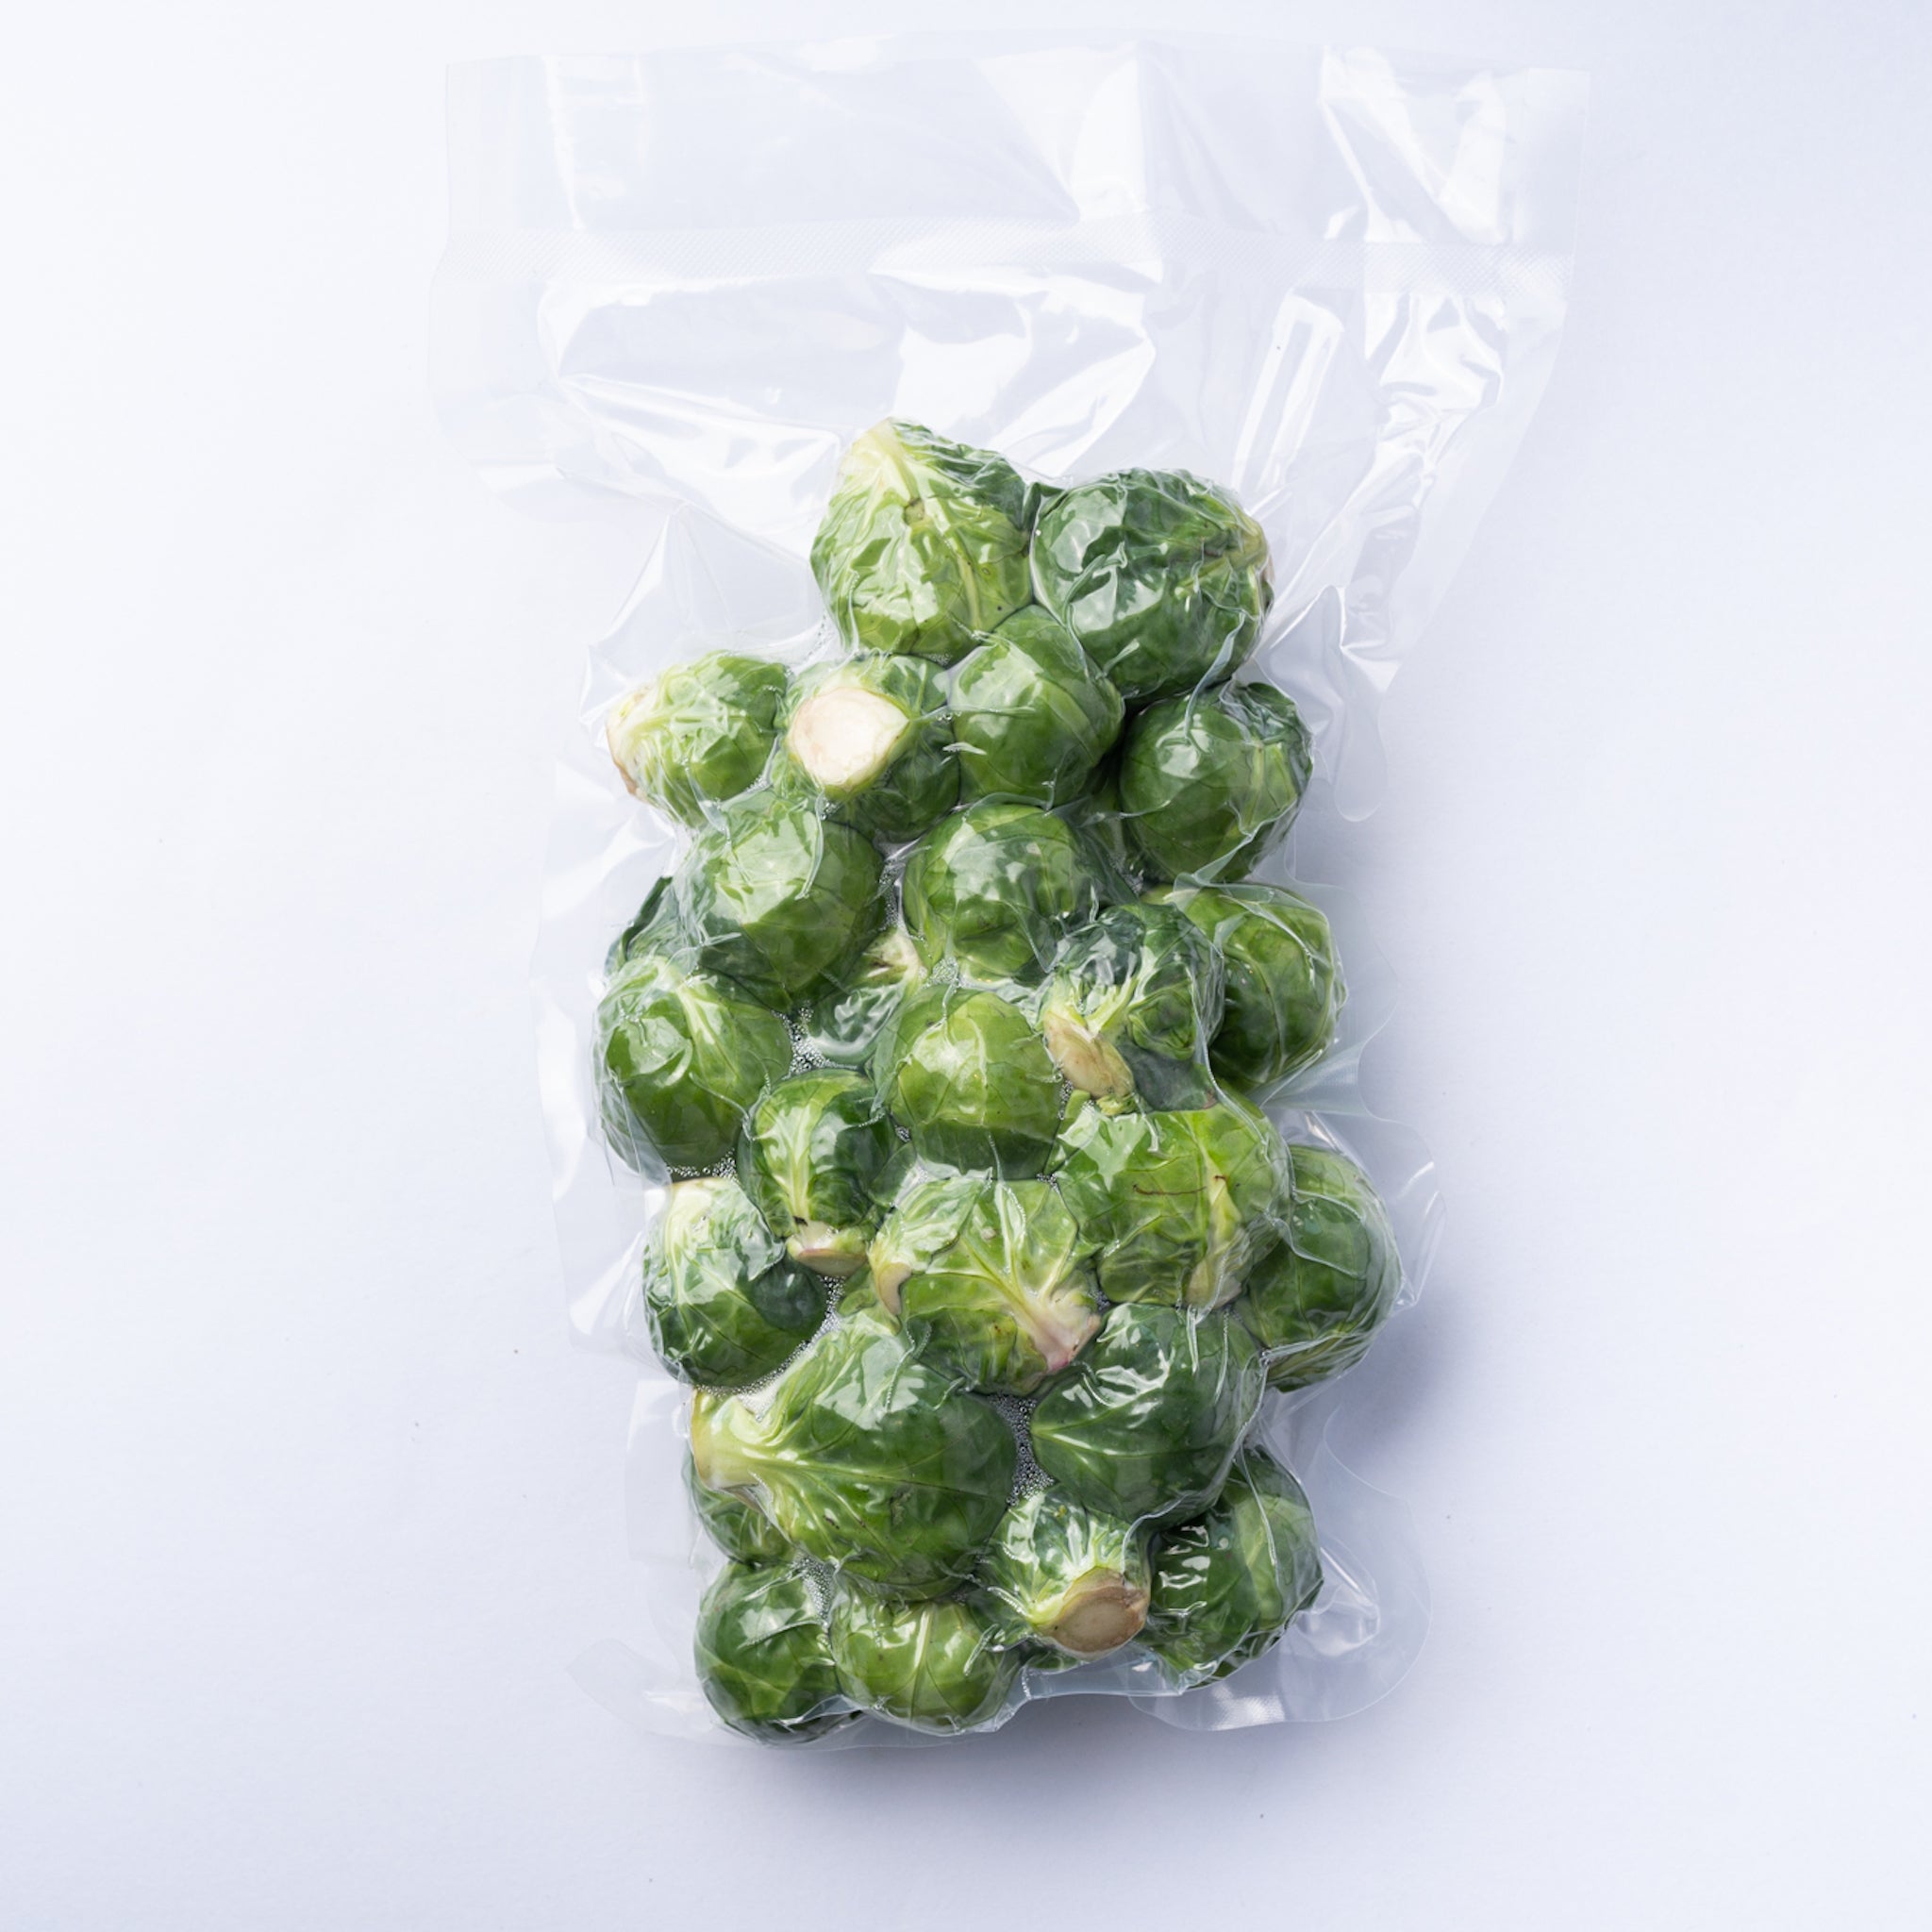 A vacuum bag of raw brussels sprouts.